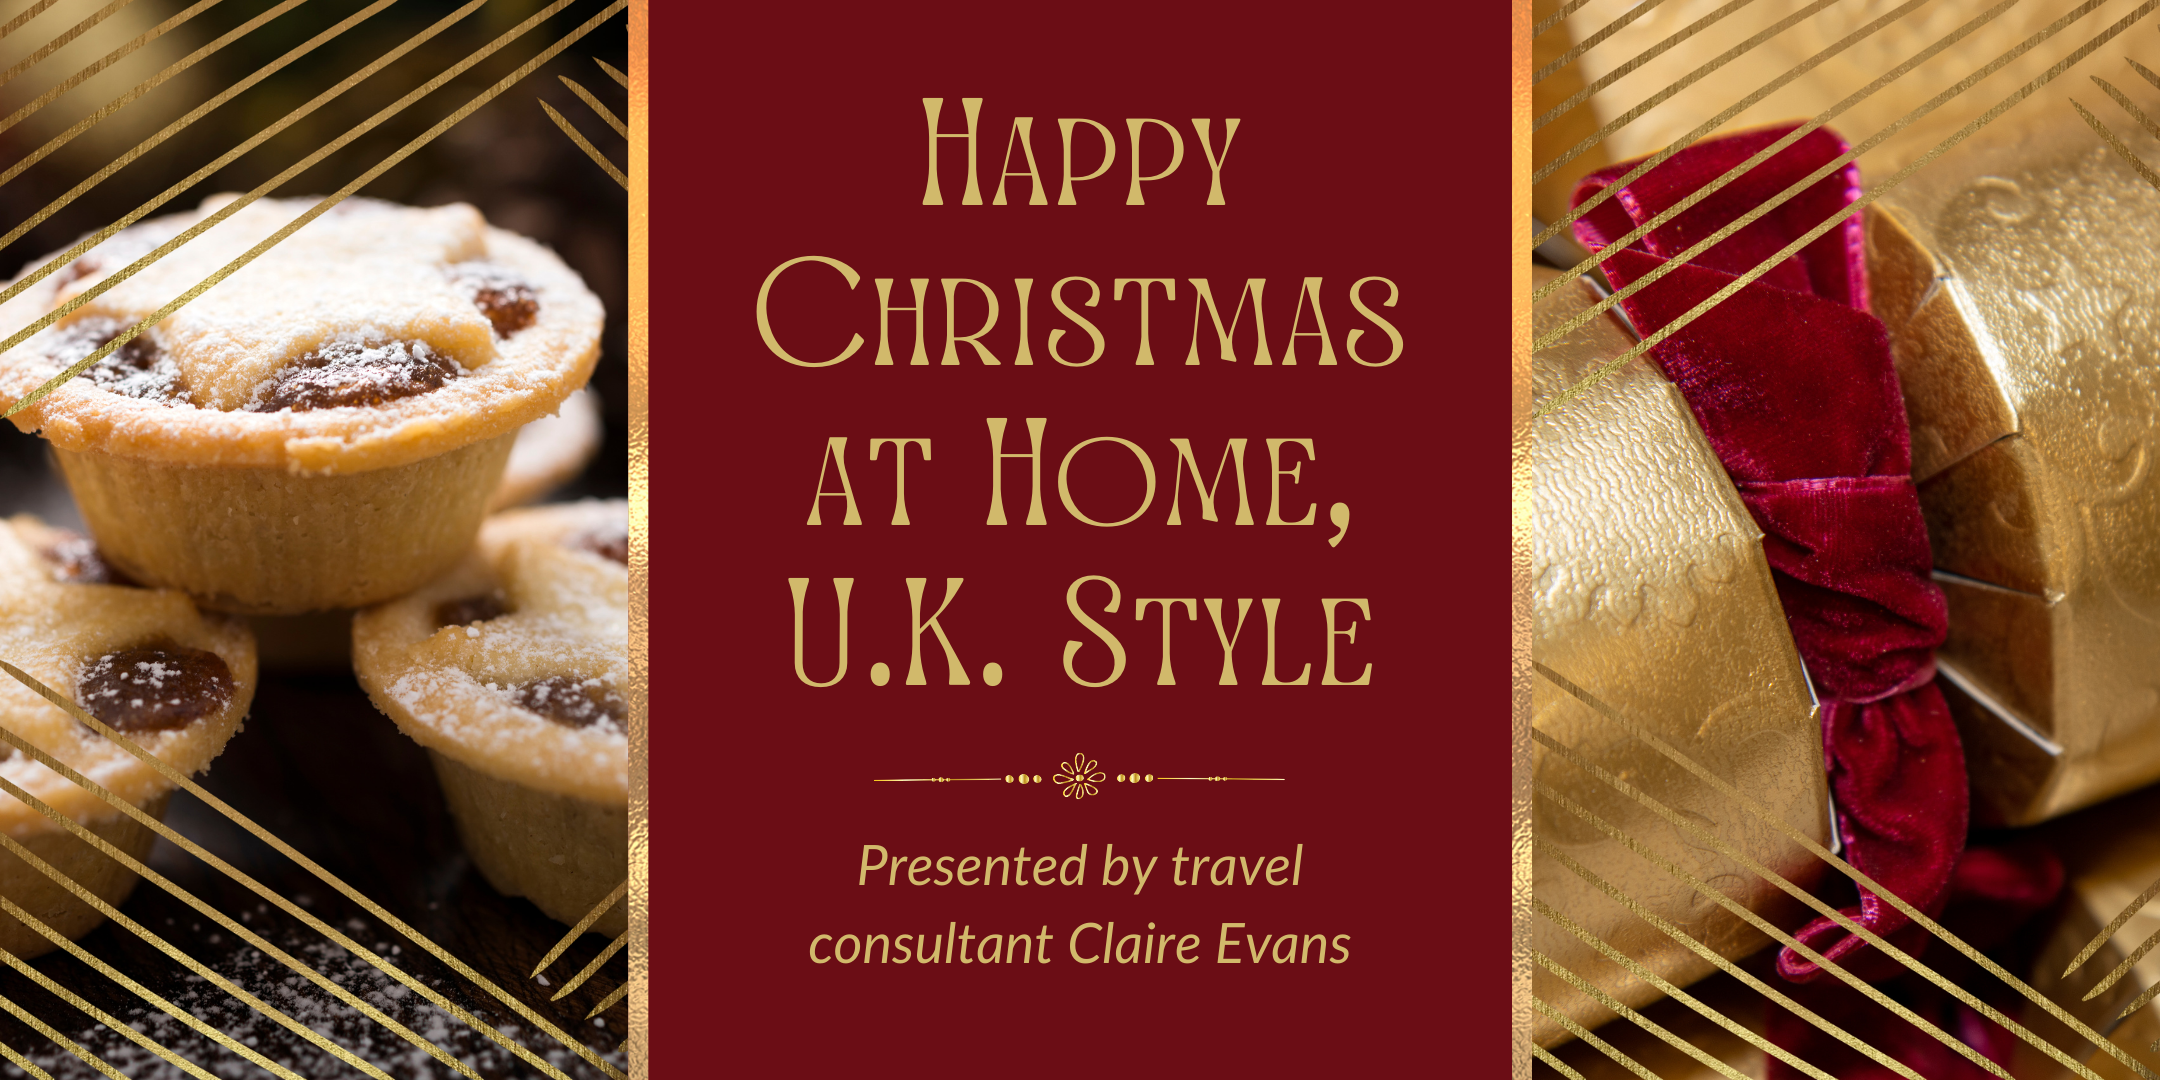 Happy Christmas at Home U.K. Style event image